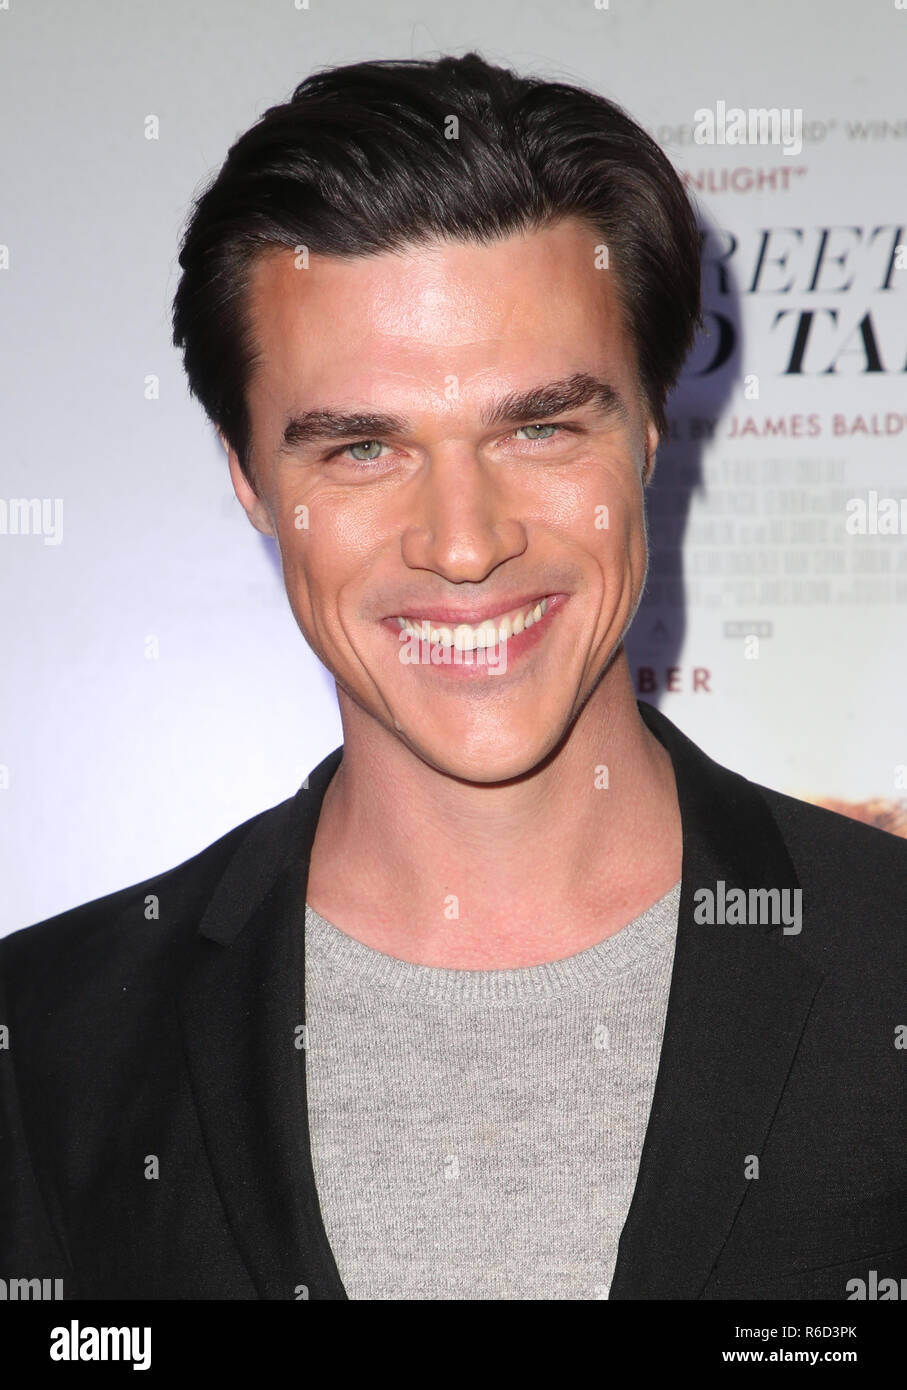 Hollywood, Ca. 4th Dec, 2018. Finn Wittrock, at the LA special screening of If Beale Street Could Talk at ArcLight Hollywood in Hollywood California on December 4, 2018. Credit: Faye Sadou/Media Punch/Alamy Live News Stock Photo